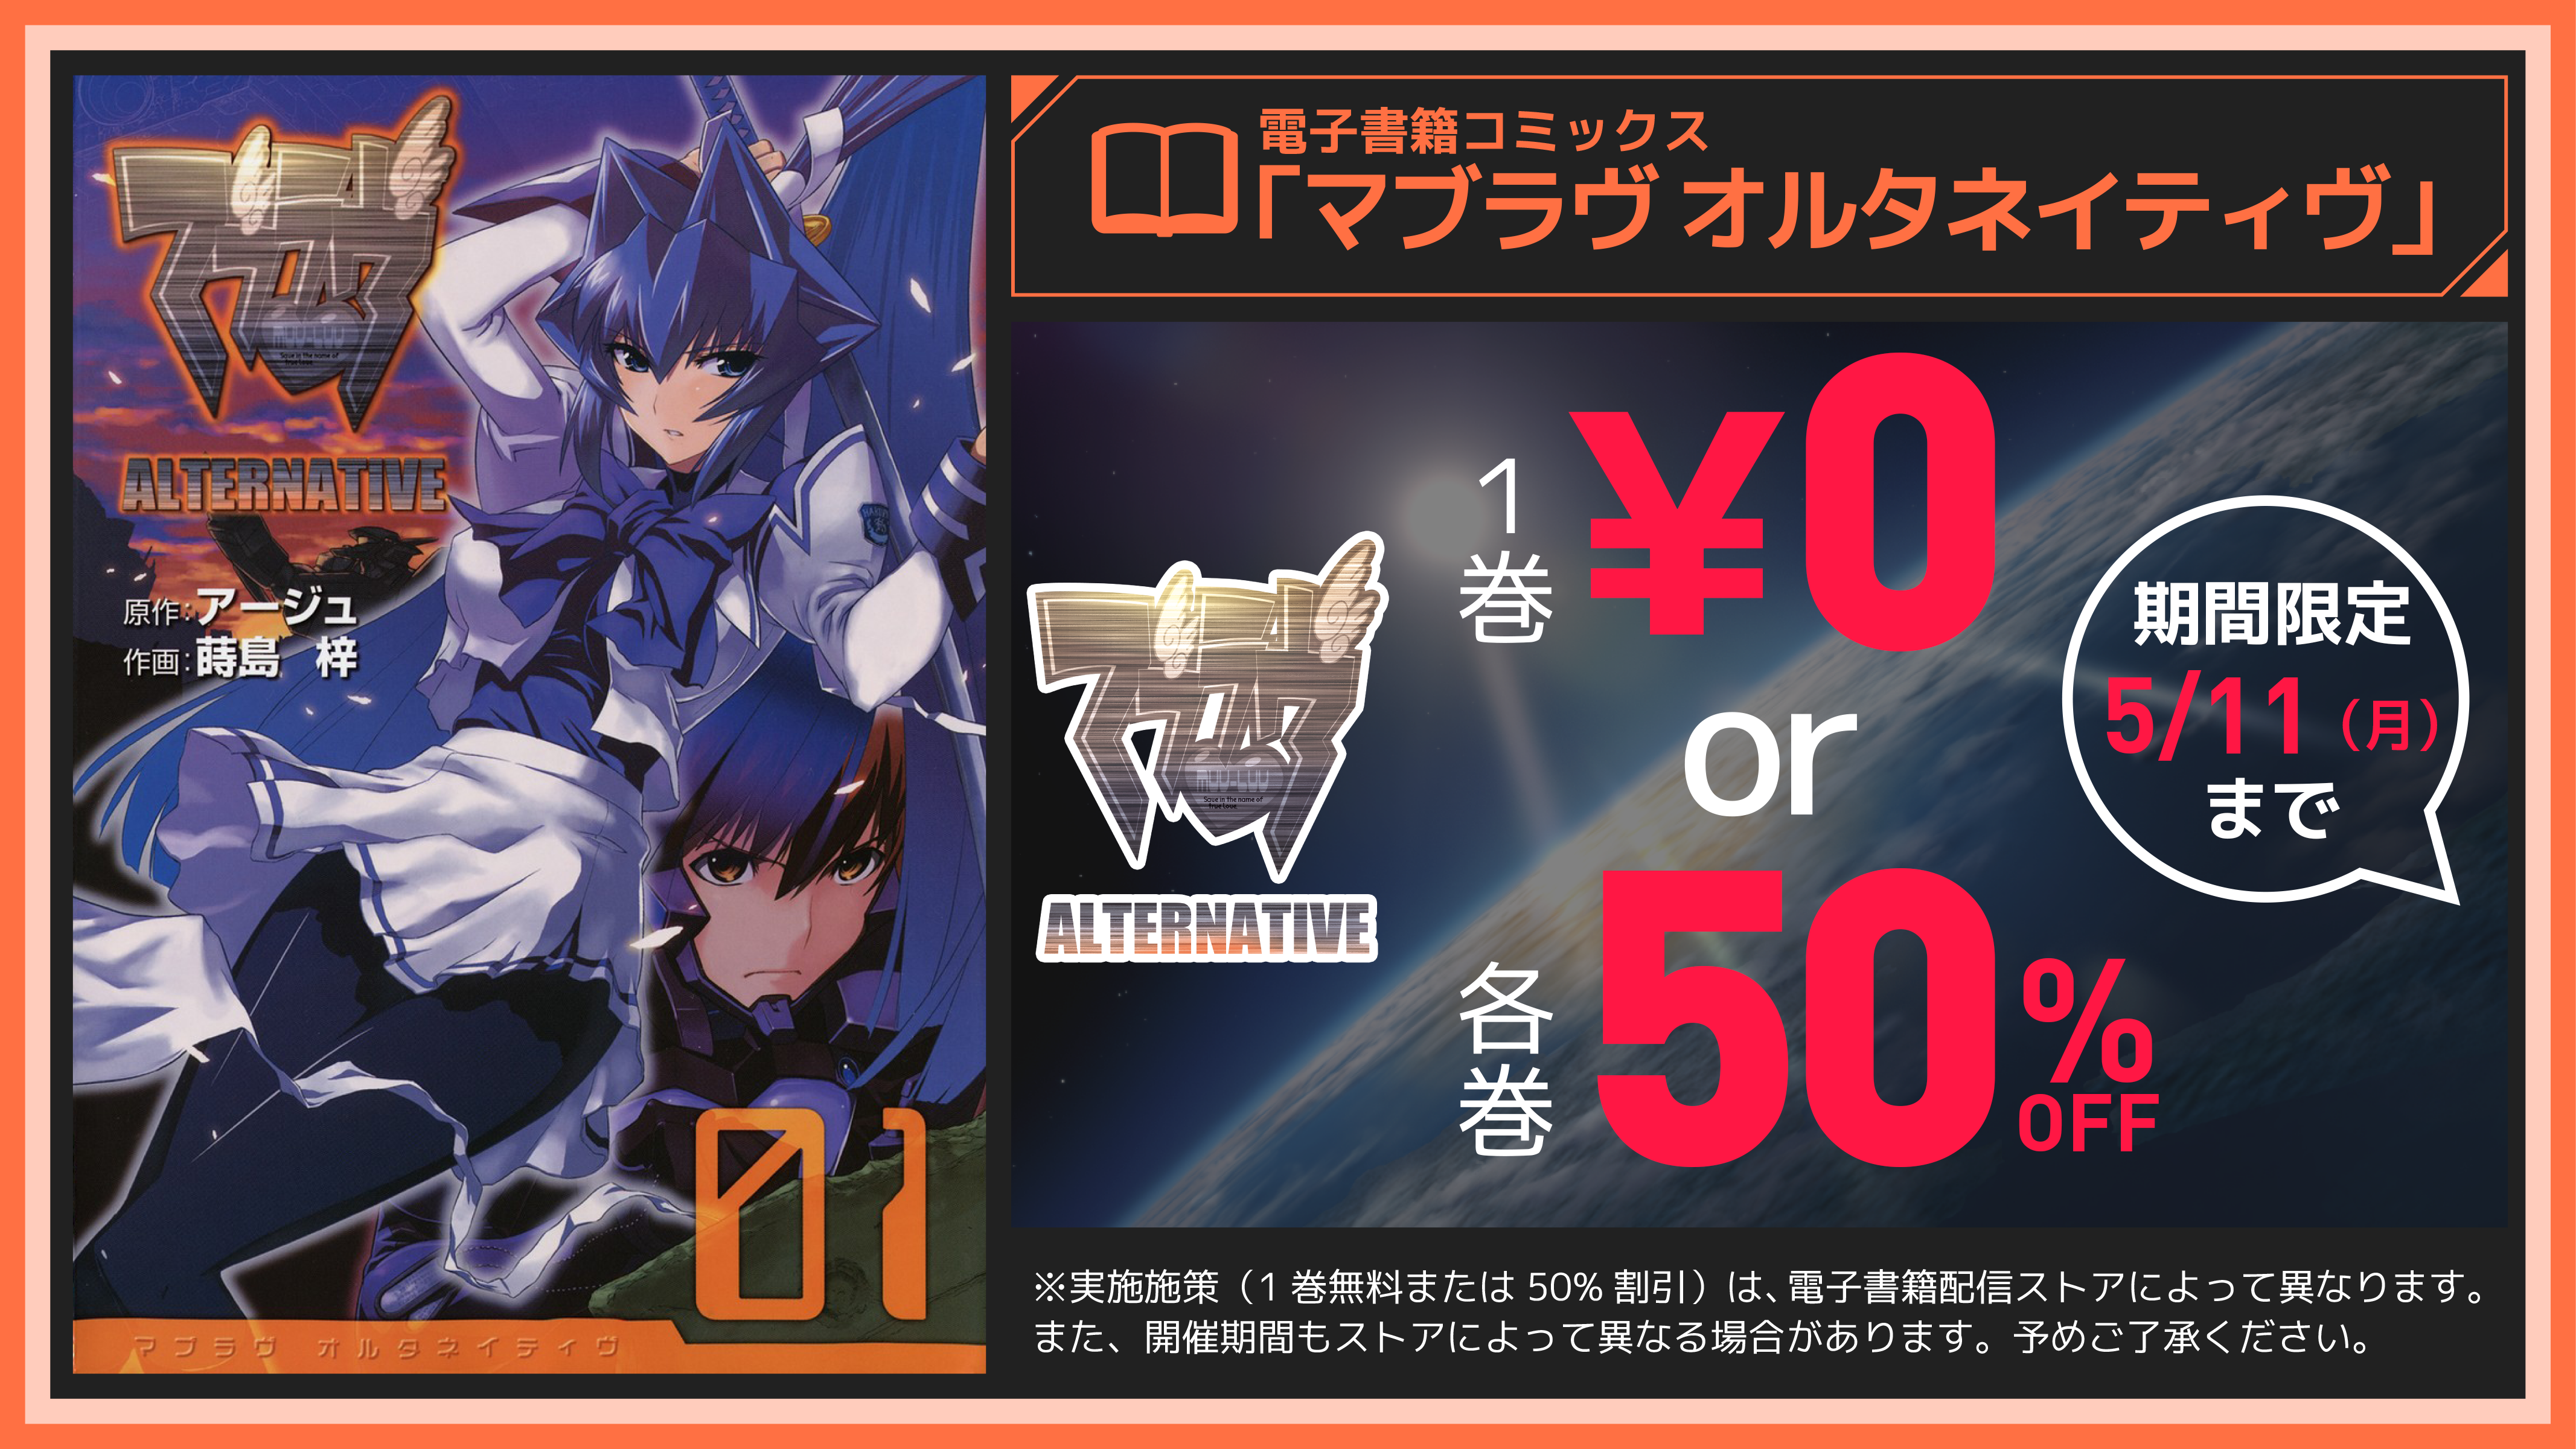 Get Volume 1 Of The Japanese Muv Luv Alternative Manga For Free Or Get The Whole Series For 50 Off Muv Luv Portal